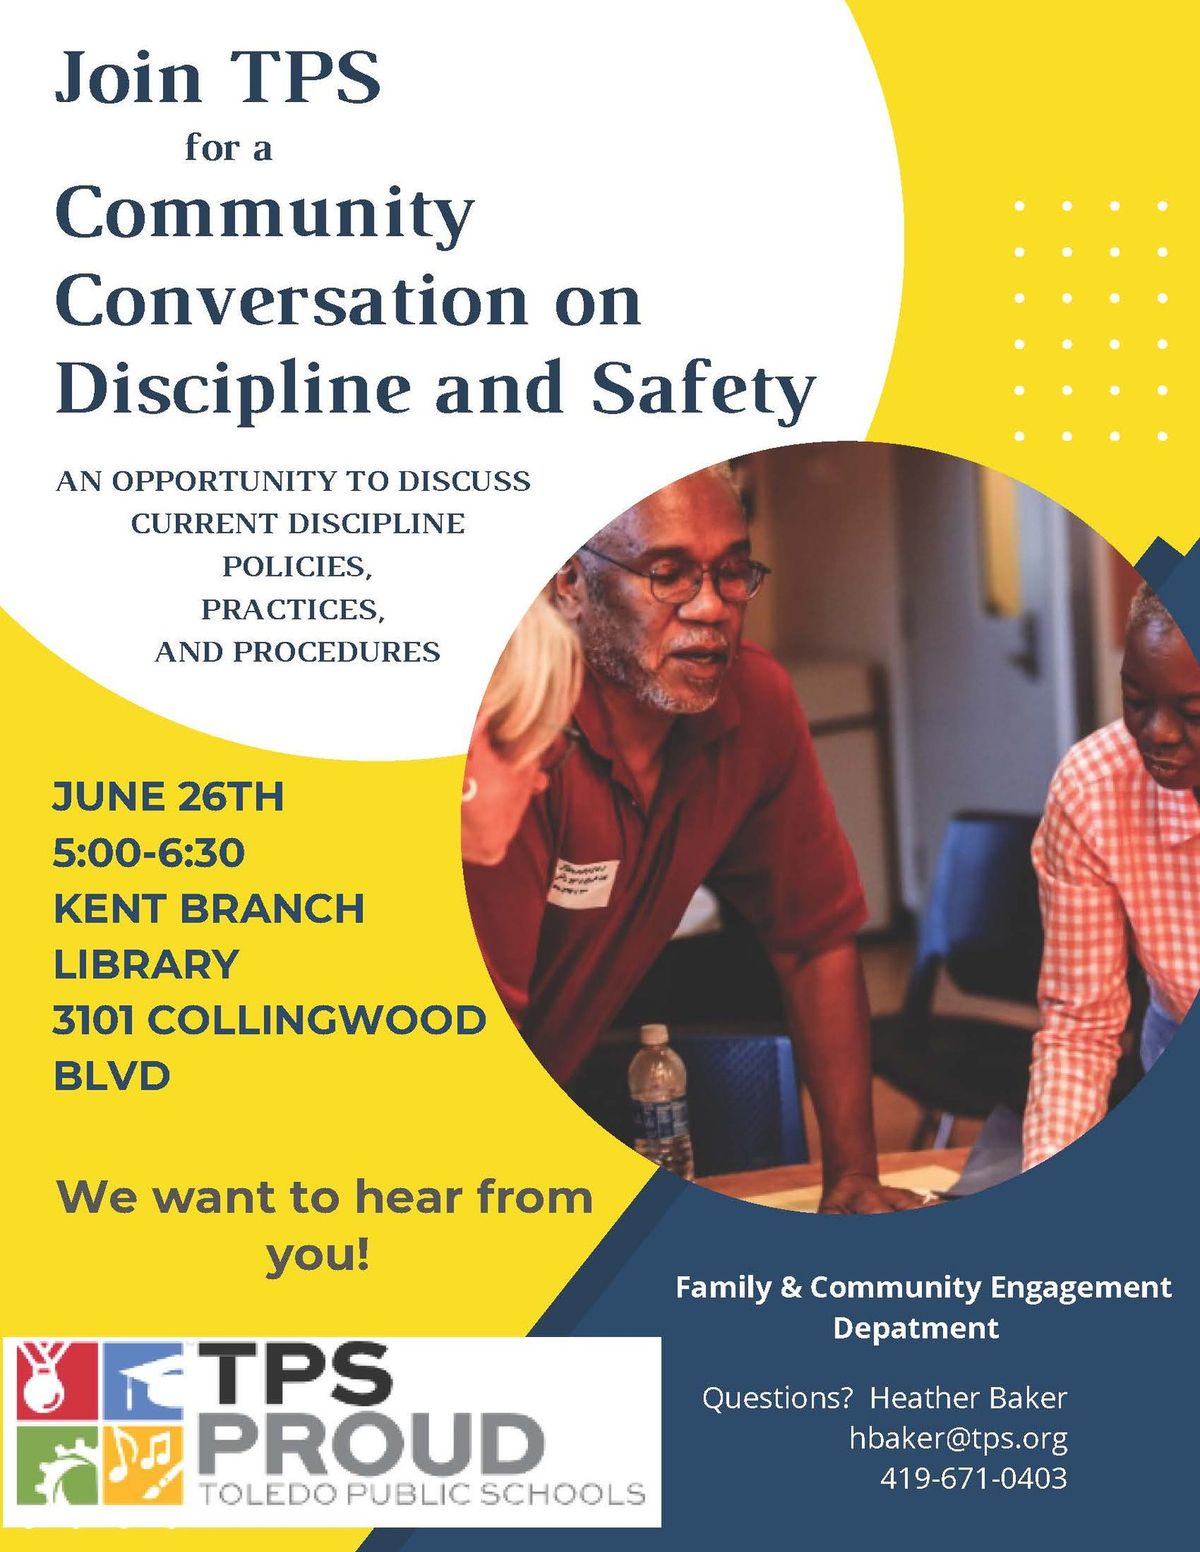 Community Conversation on Discipline and Safety